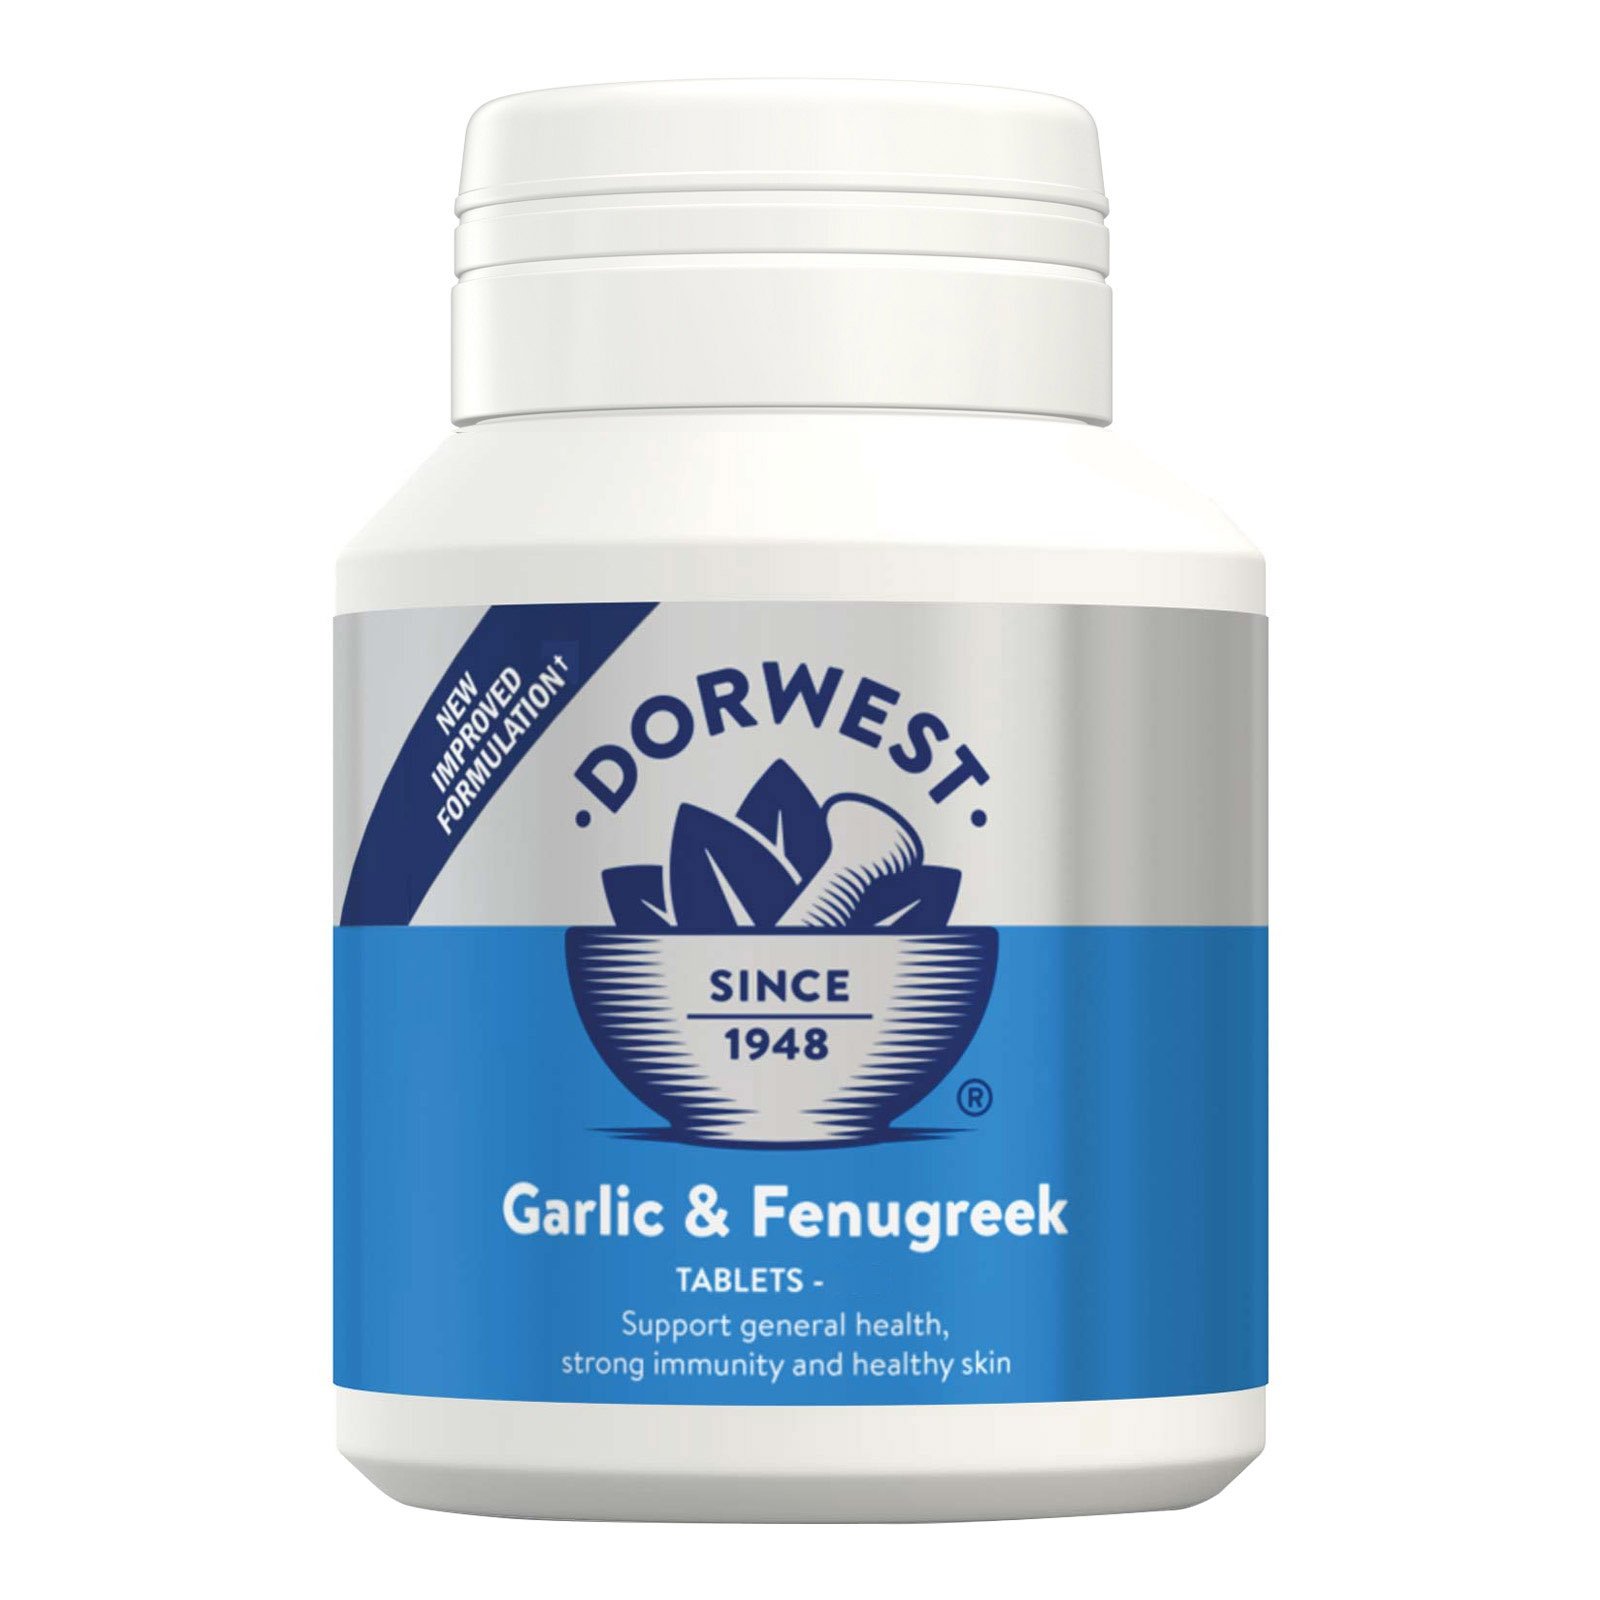 Dorwest-Garlic-and-Fenugreek-Tablets-For-Dogs-And-Cats_09122022_000736.jpg